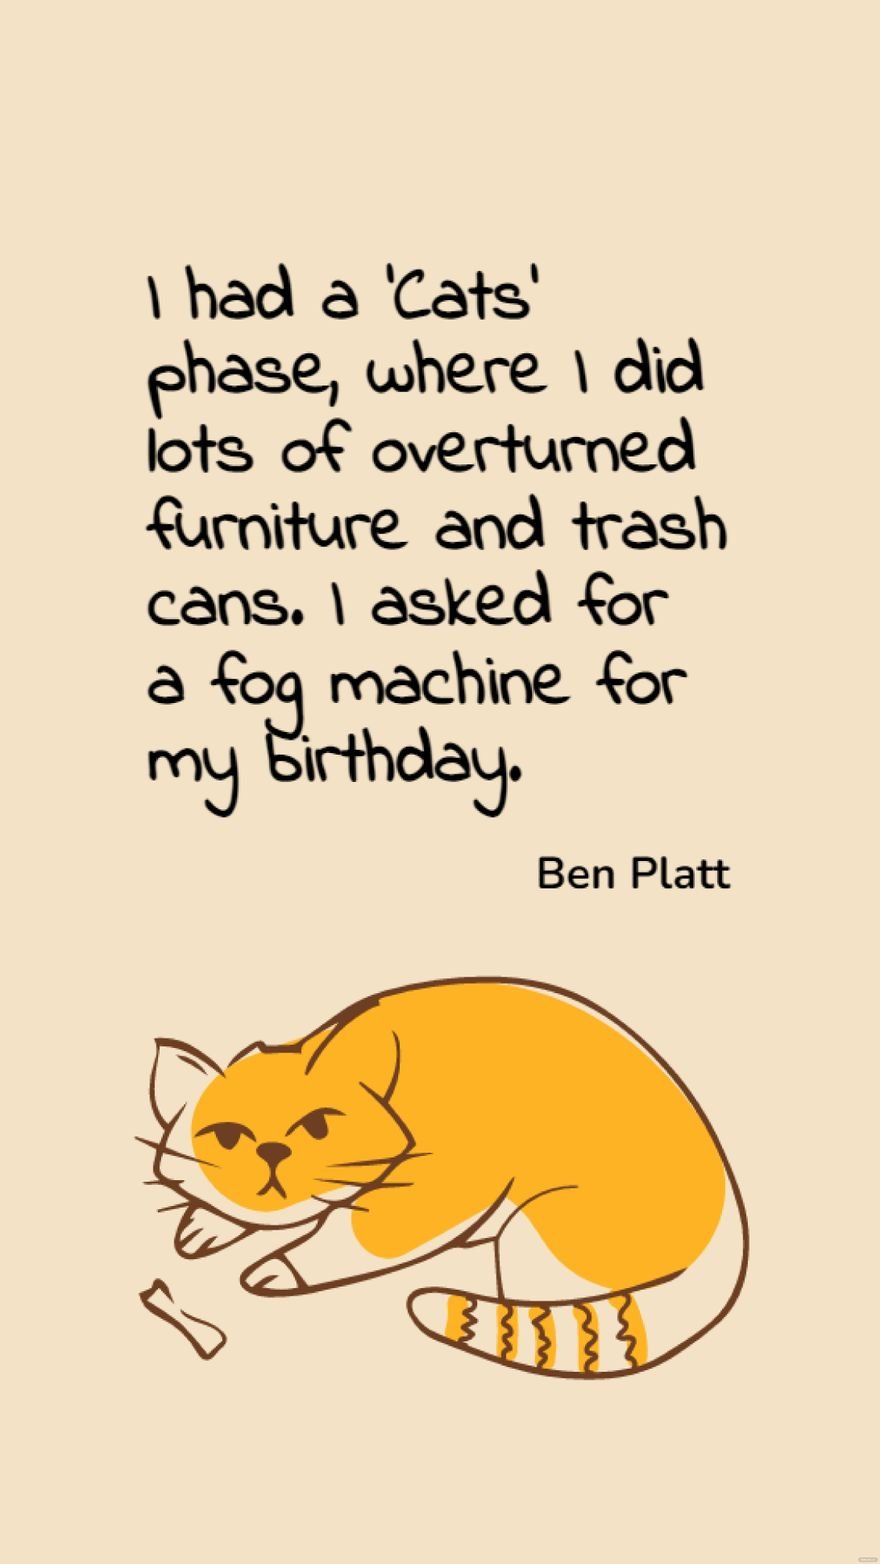 Free Ben Platt - I had a 'Cats' phase, where I did lots of overturned furniture and trash cans. I asked for a fog machine for my birthday.